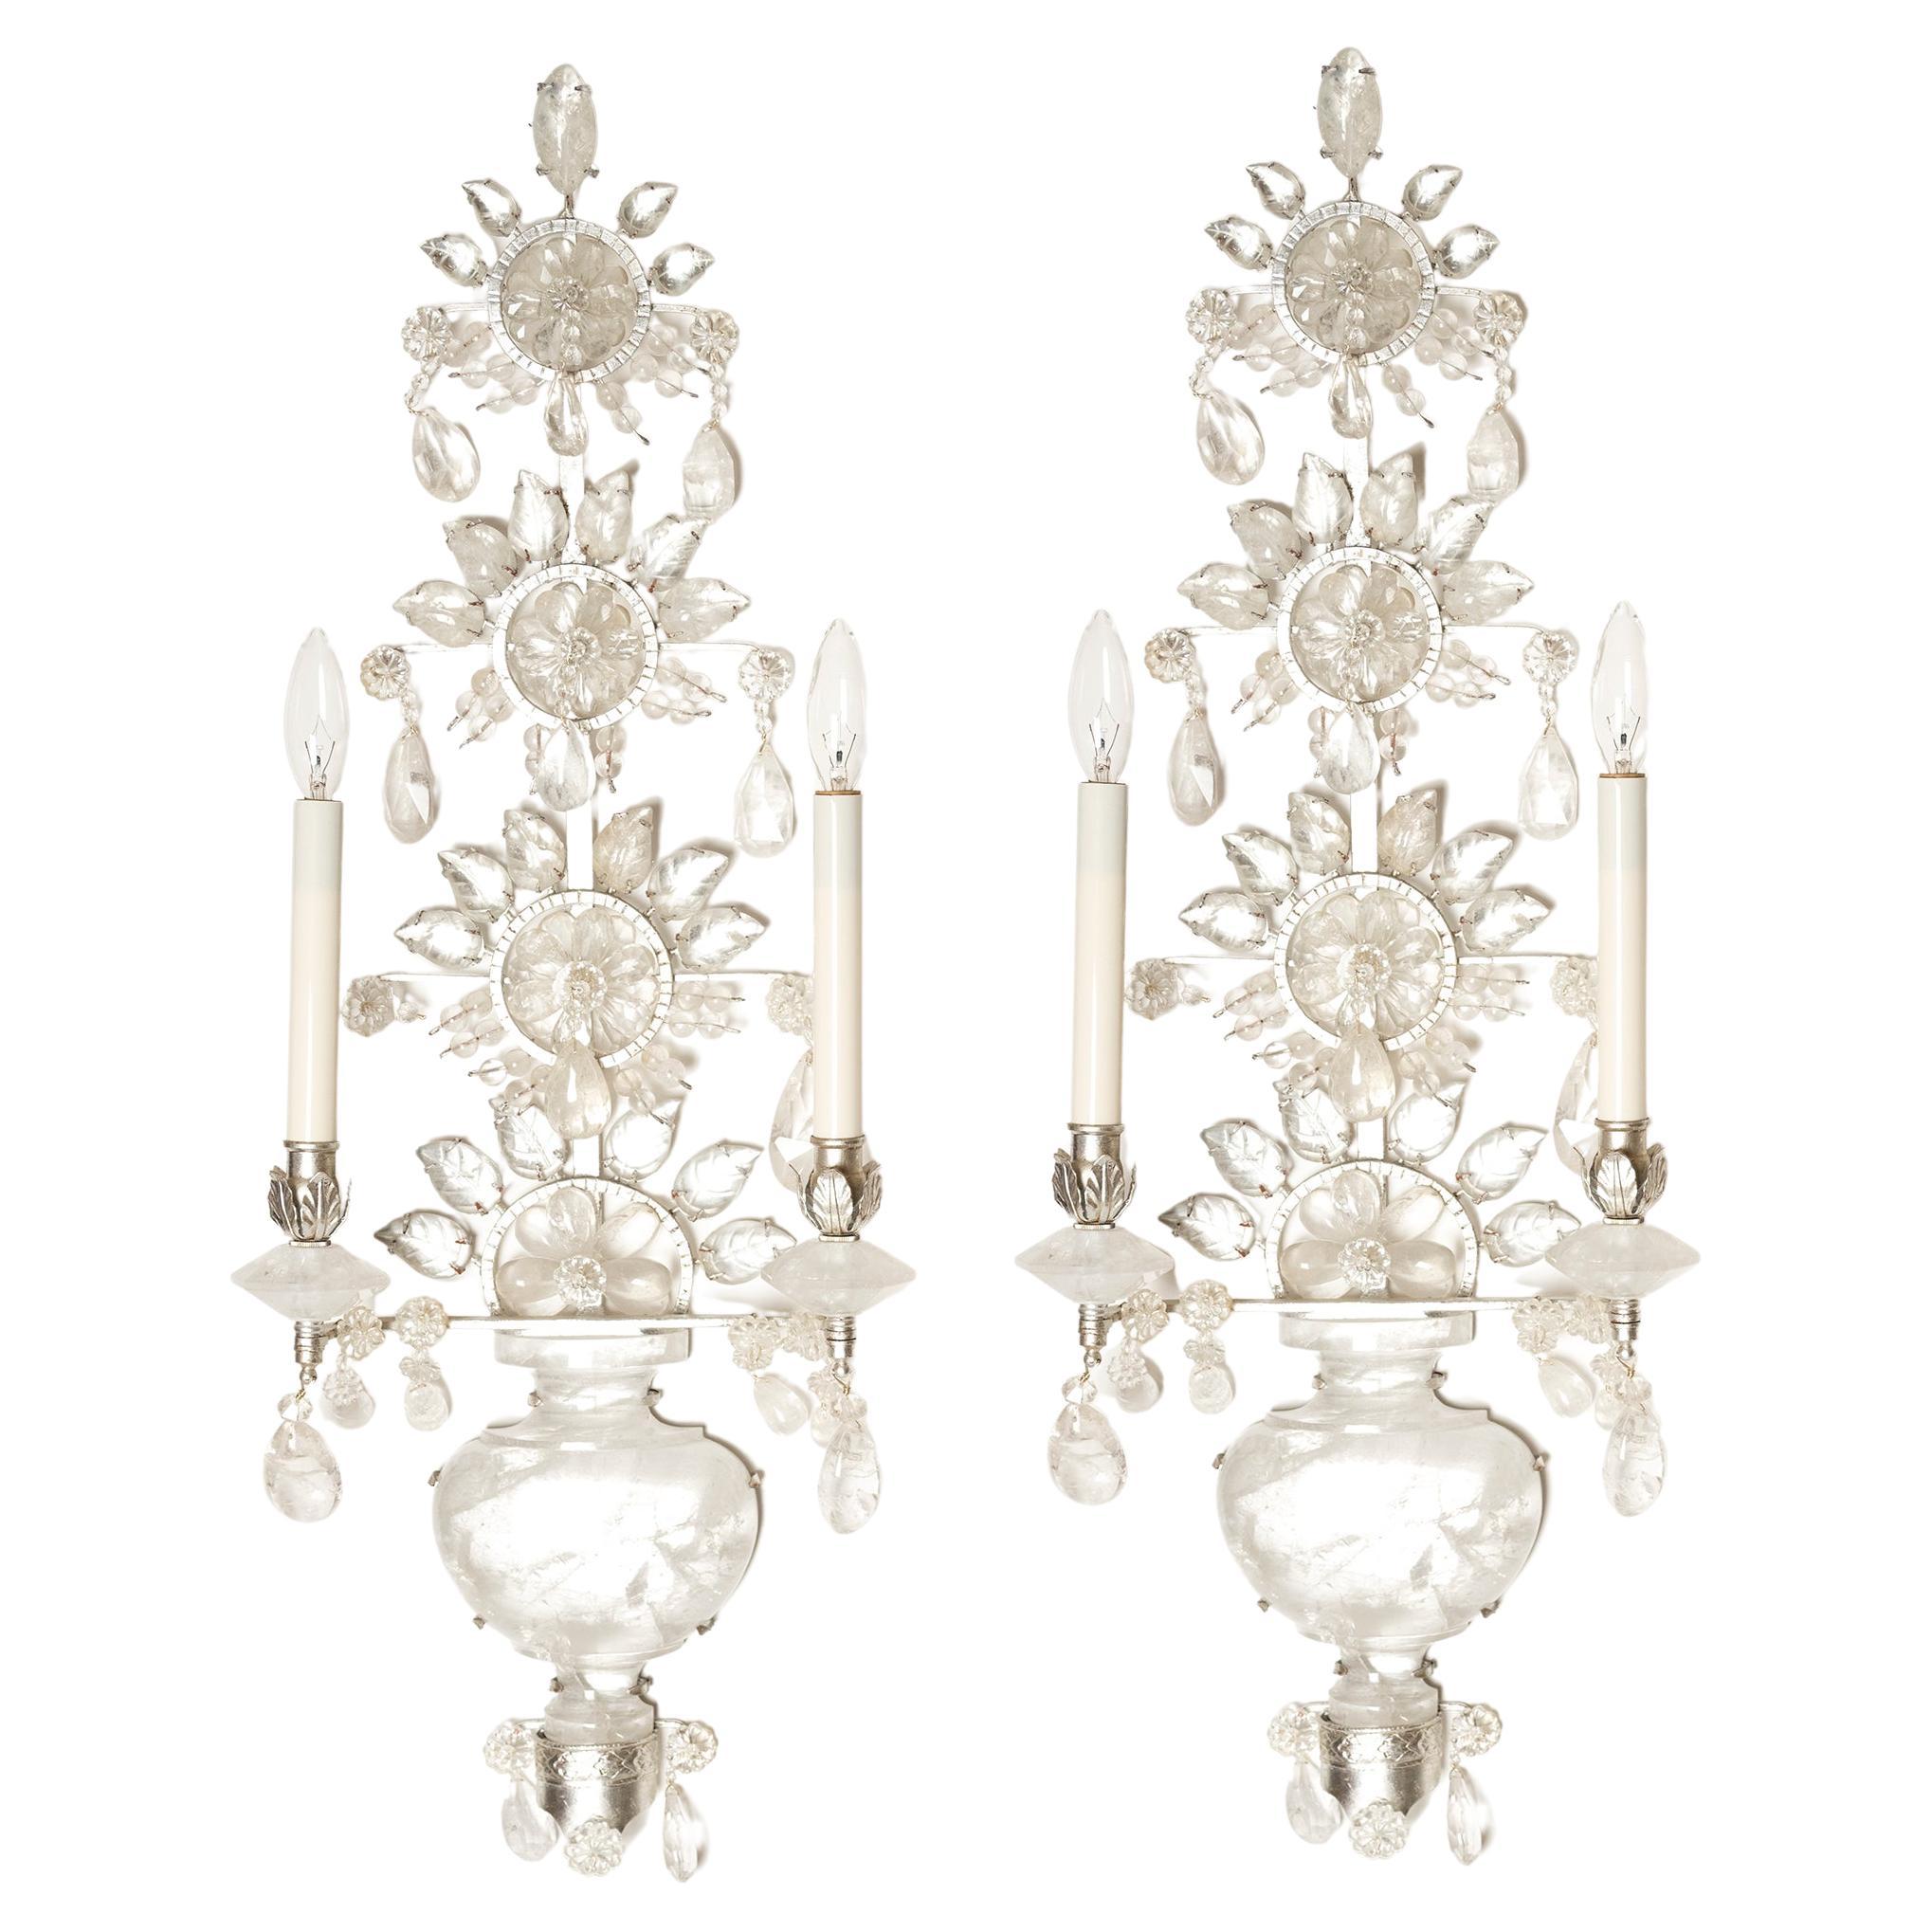 Pair of Chinoiserie Style Silvered Metal Two-Light Rock Crystal Sconces